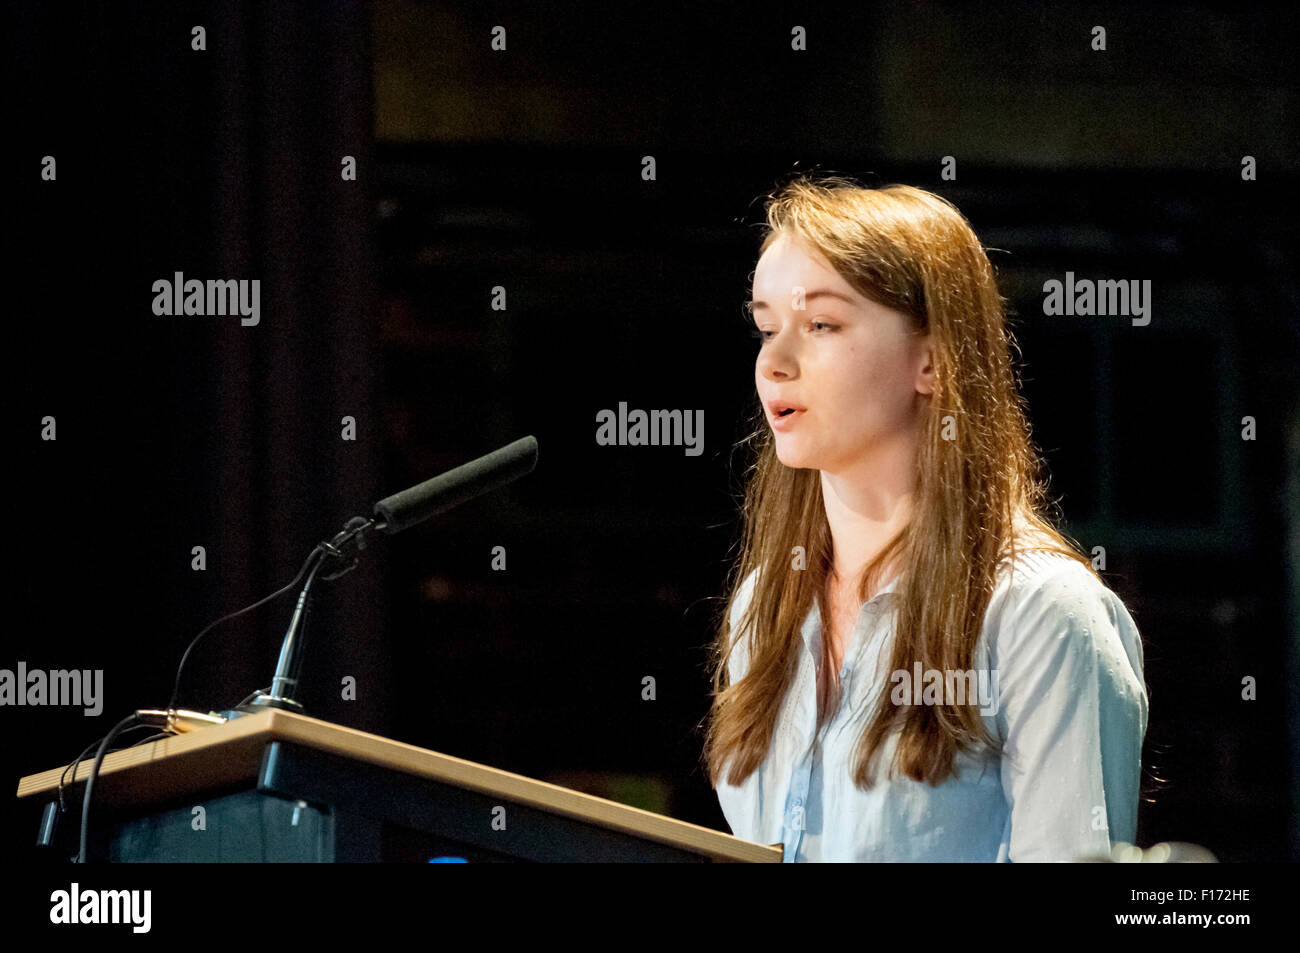 Exeter, UK. 28th Aug, 2015. Beth Soames address the auience during the Jeremy Corbyn rally in Exeter in front of 500 supporters at the Exeter Corn Exchange Credit:  Clive Chilvers/Alamy Live News Stock Photo